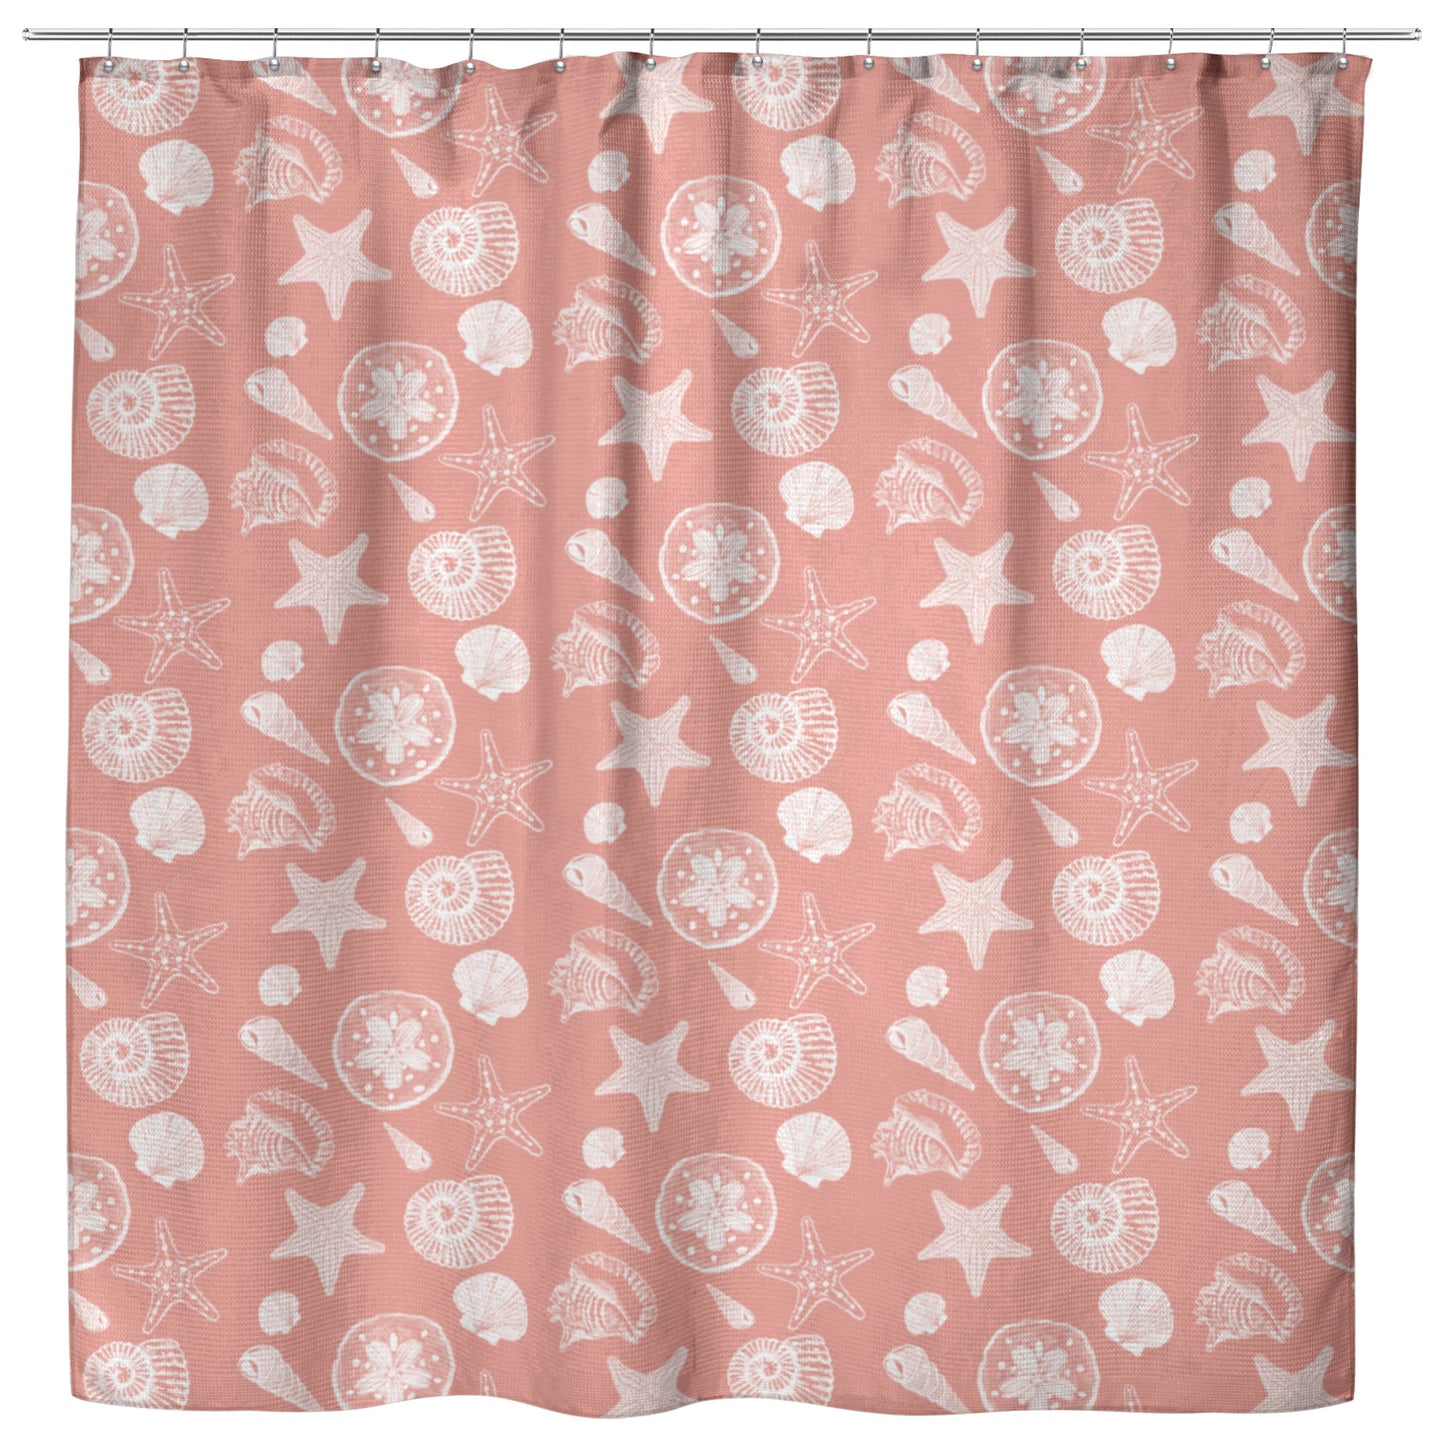 Seashell Sketches on Coral Background, Shower Curtain